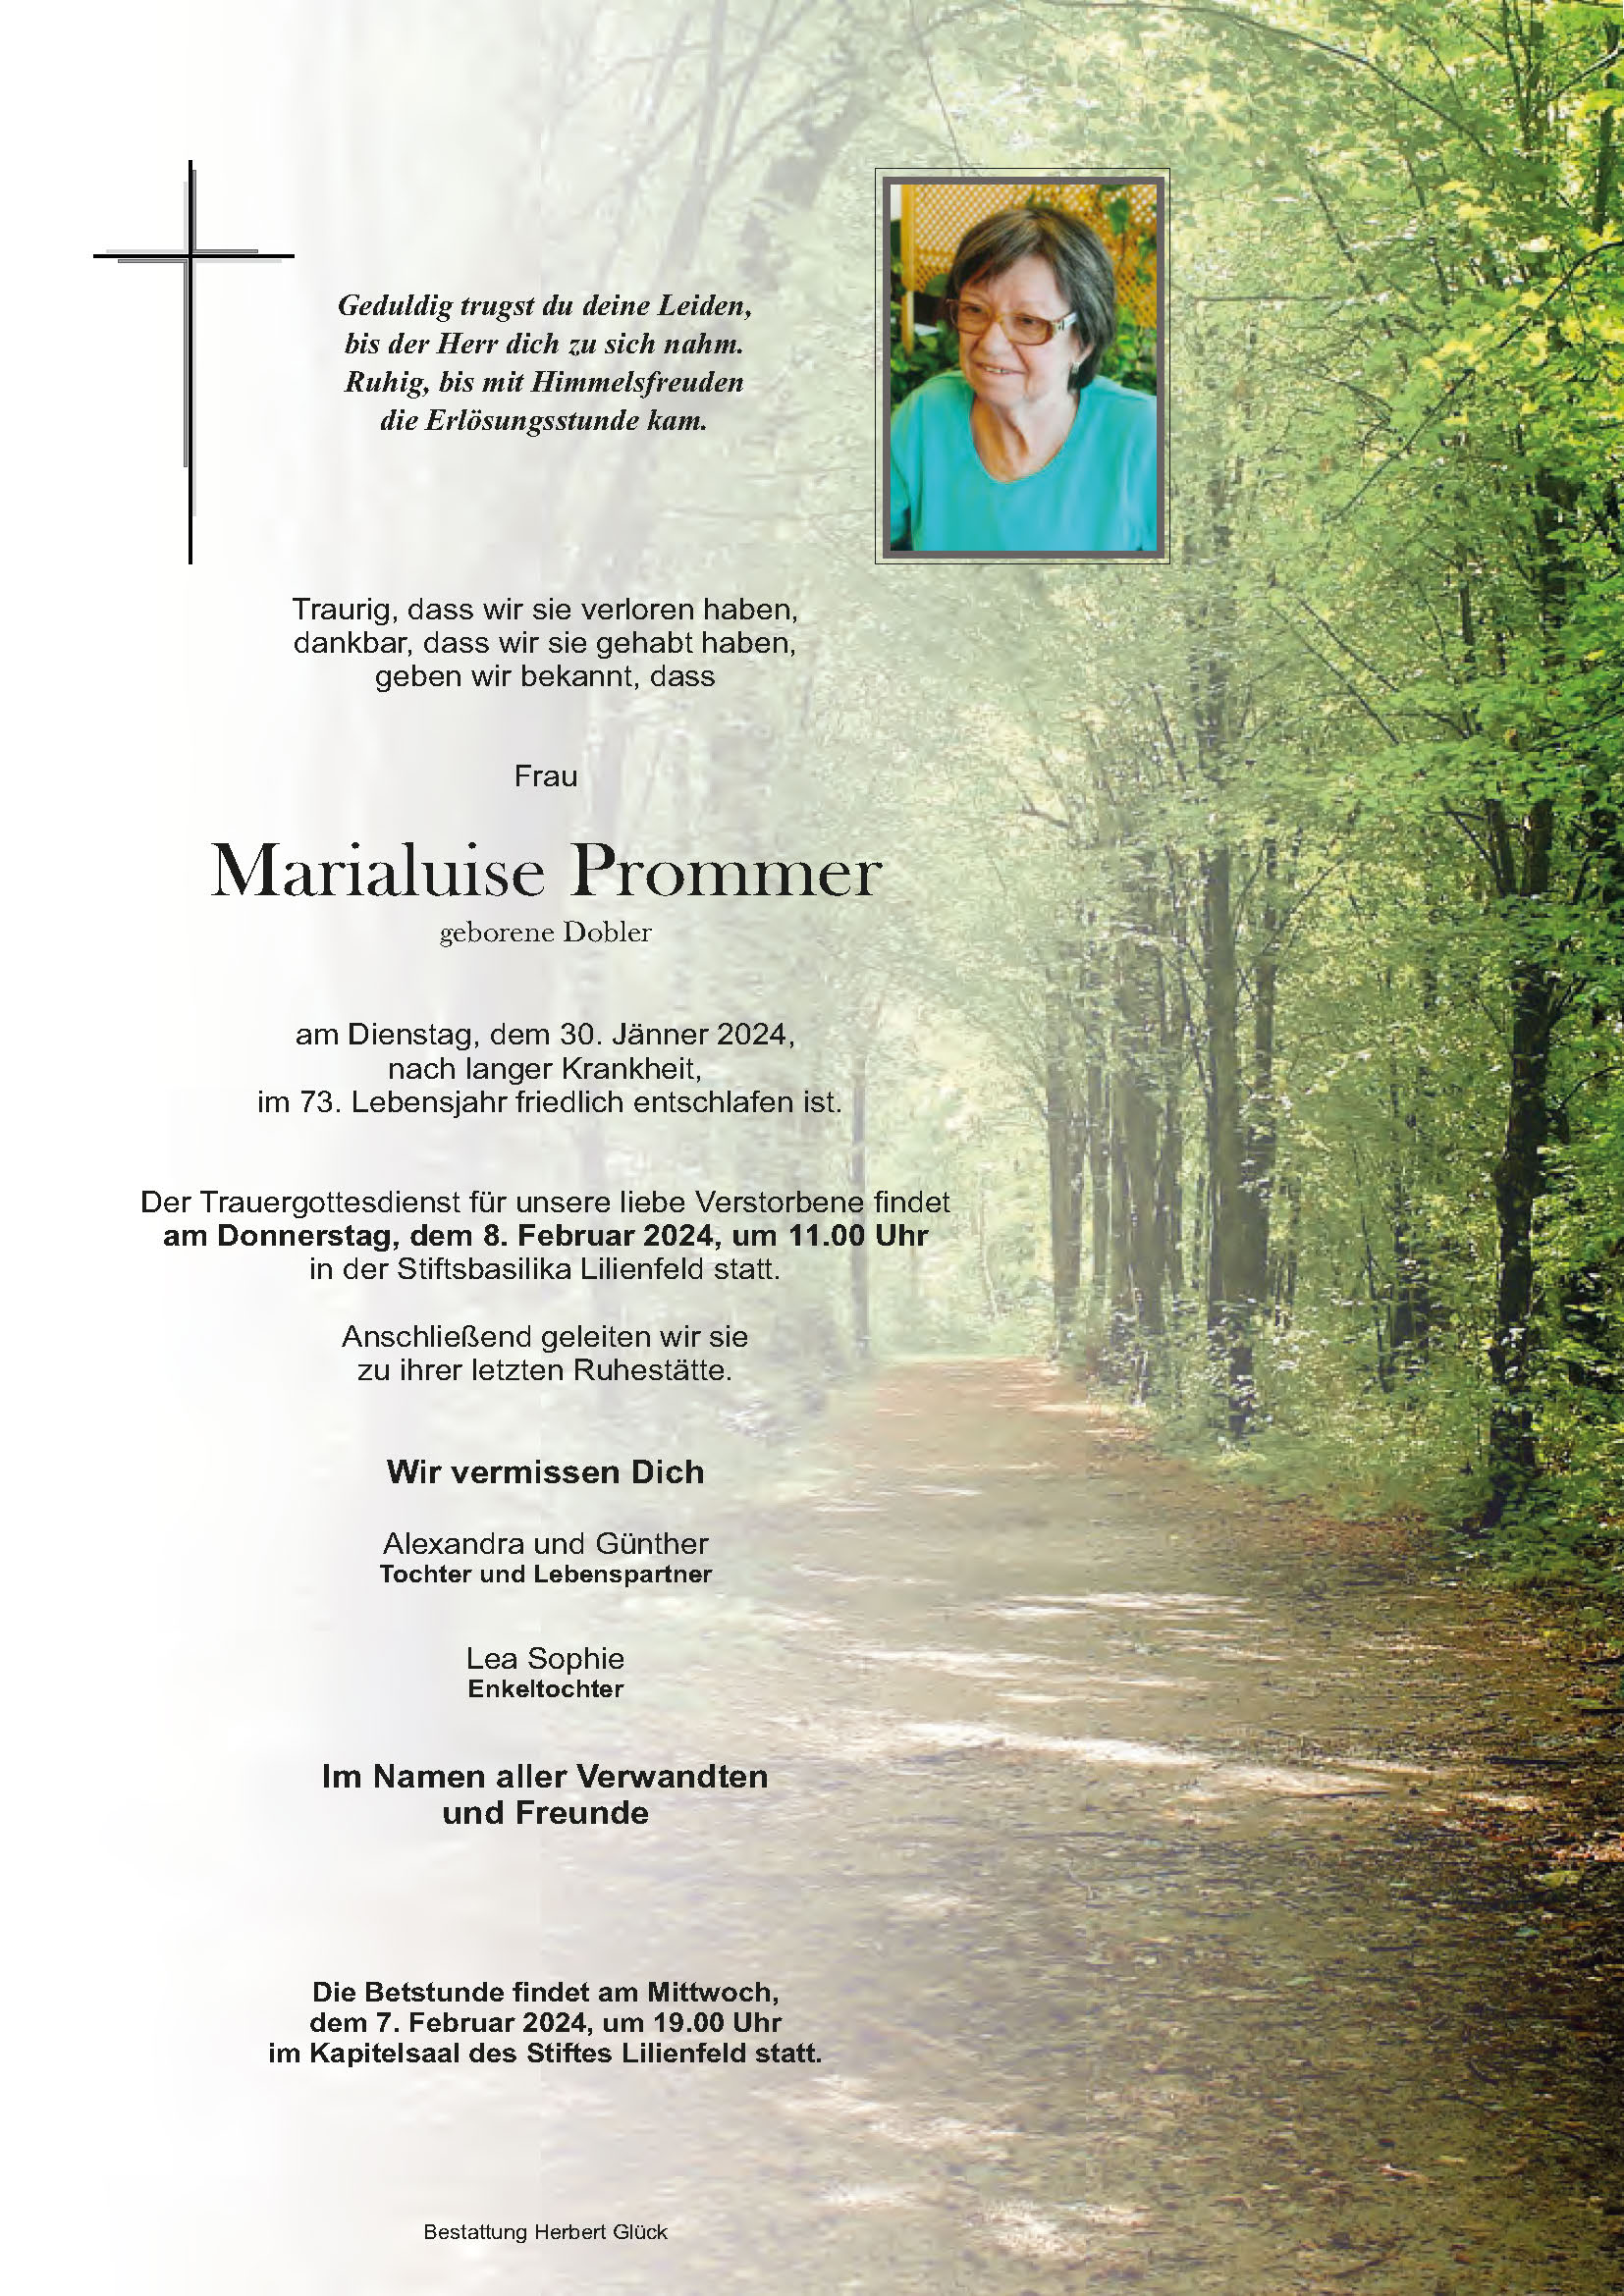 Sterbefall Marialuise Prommer